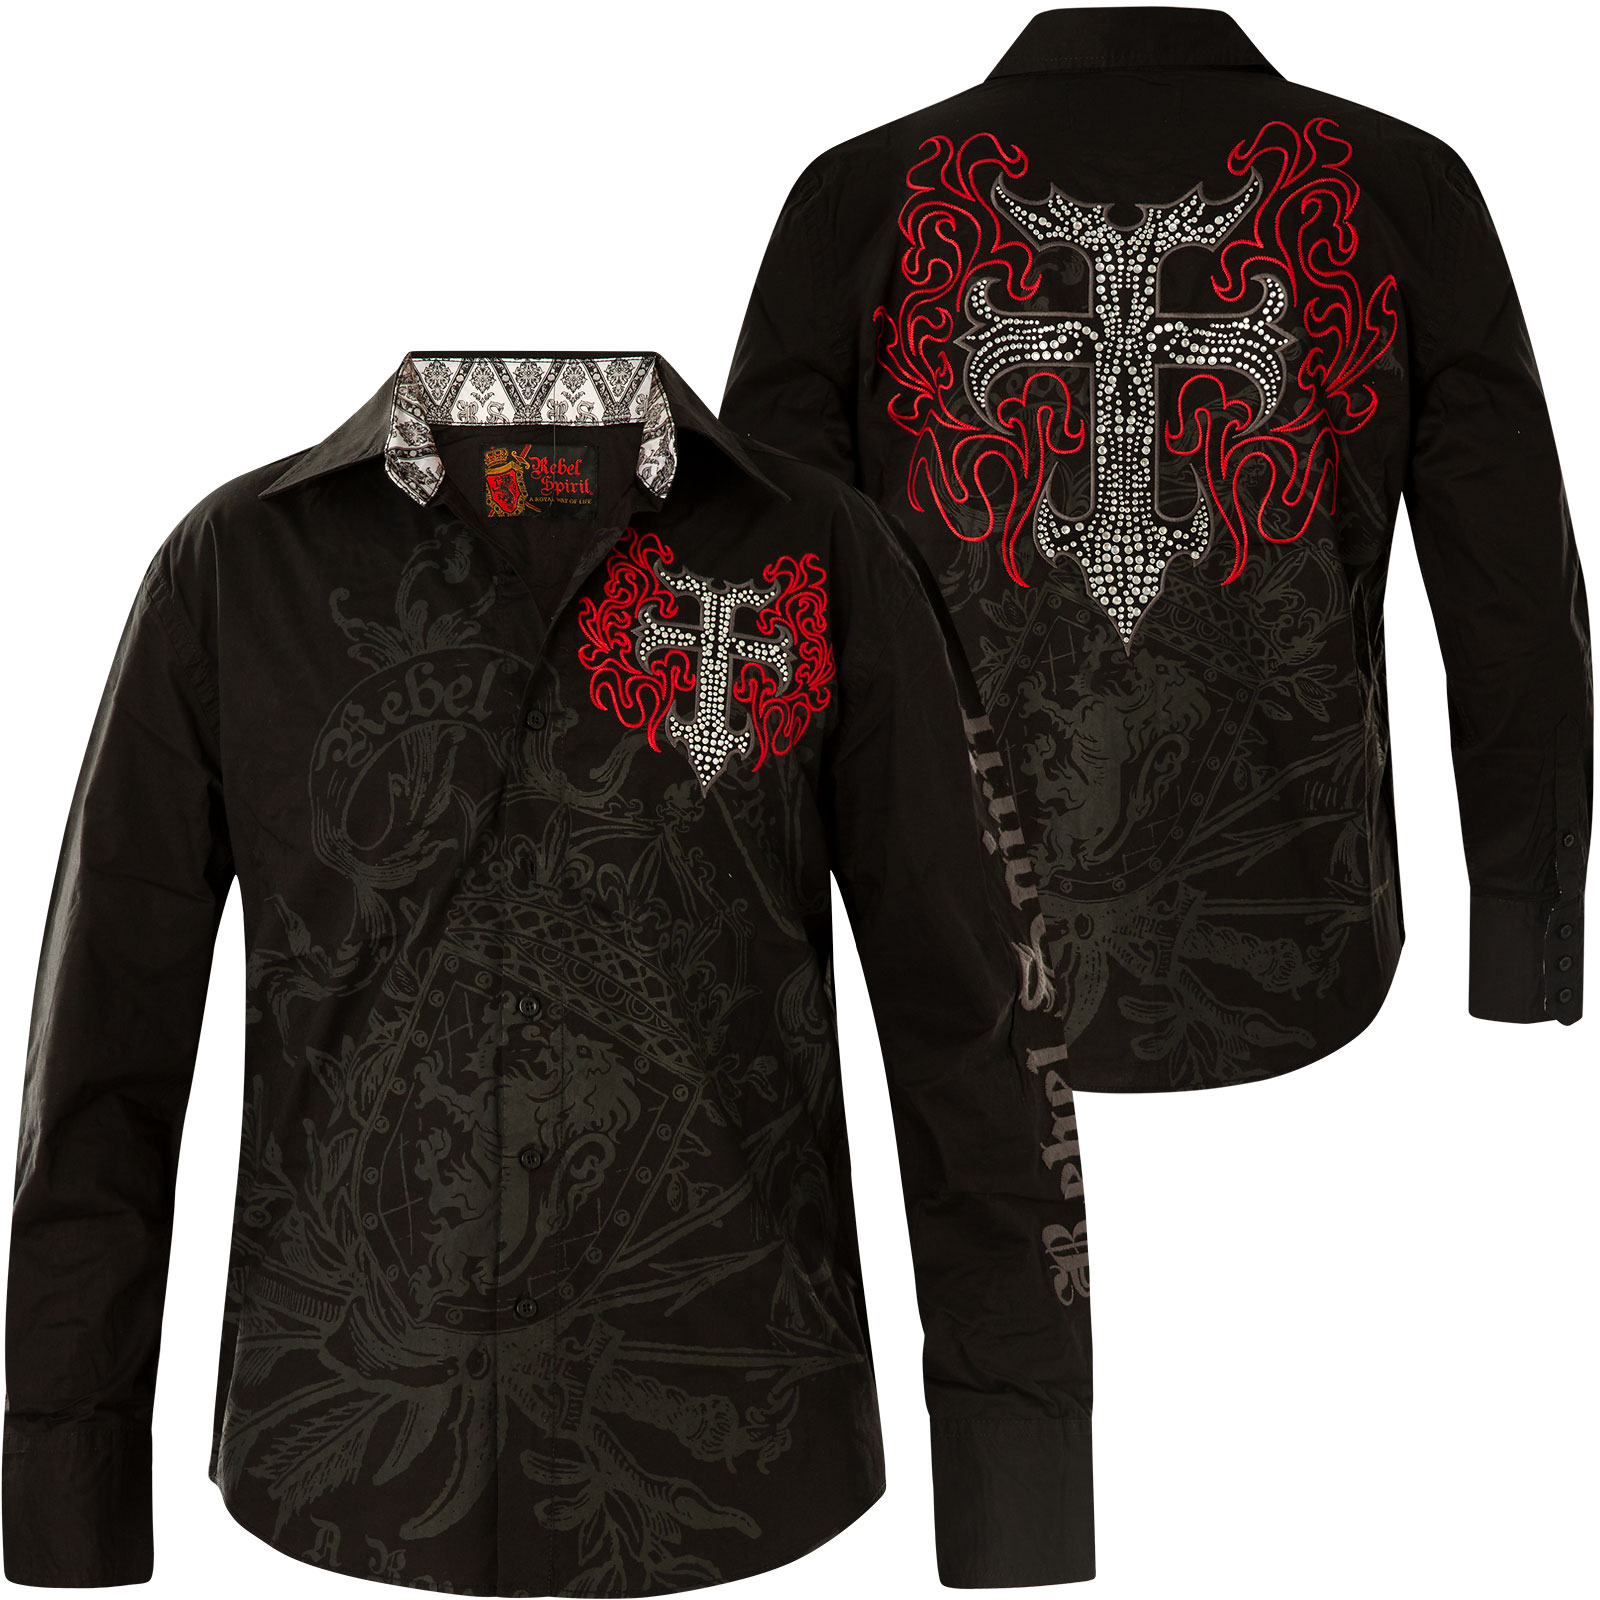 Rebel Spirit LS Shirt LSW111099 embroidery with flames and cross